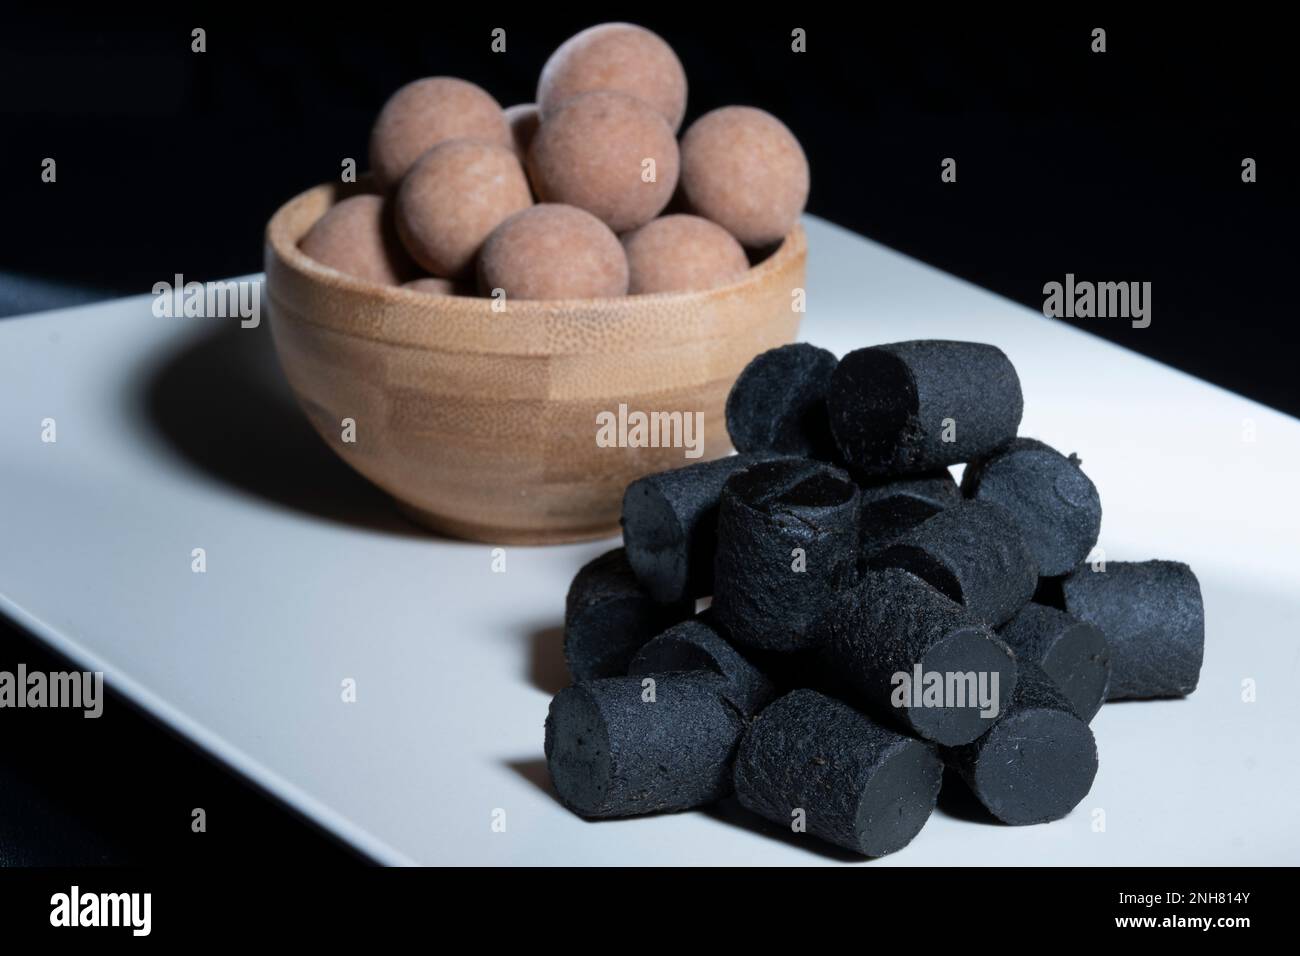 Helsinki / Finland - FEBRUARY 21, 2023 - Traditional Finnish cuisine: A closeup of the traditional Finnish delicacy of black licorice against a dark b Stock Photo